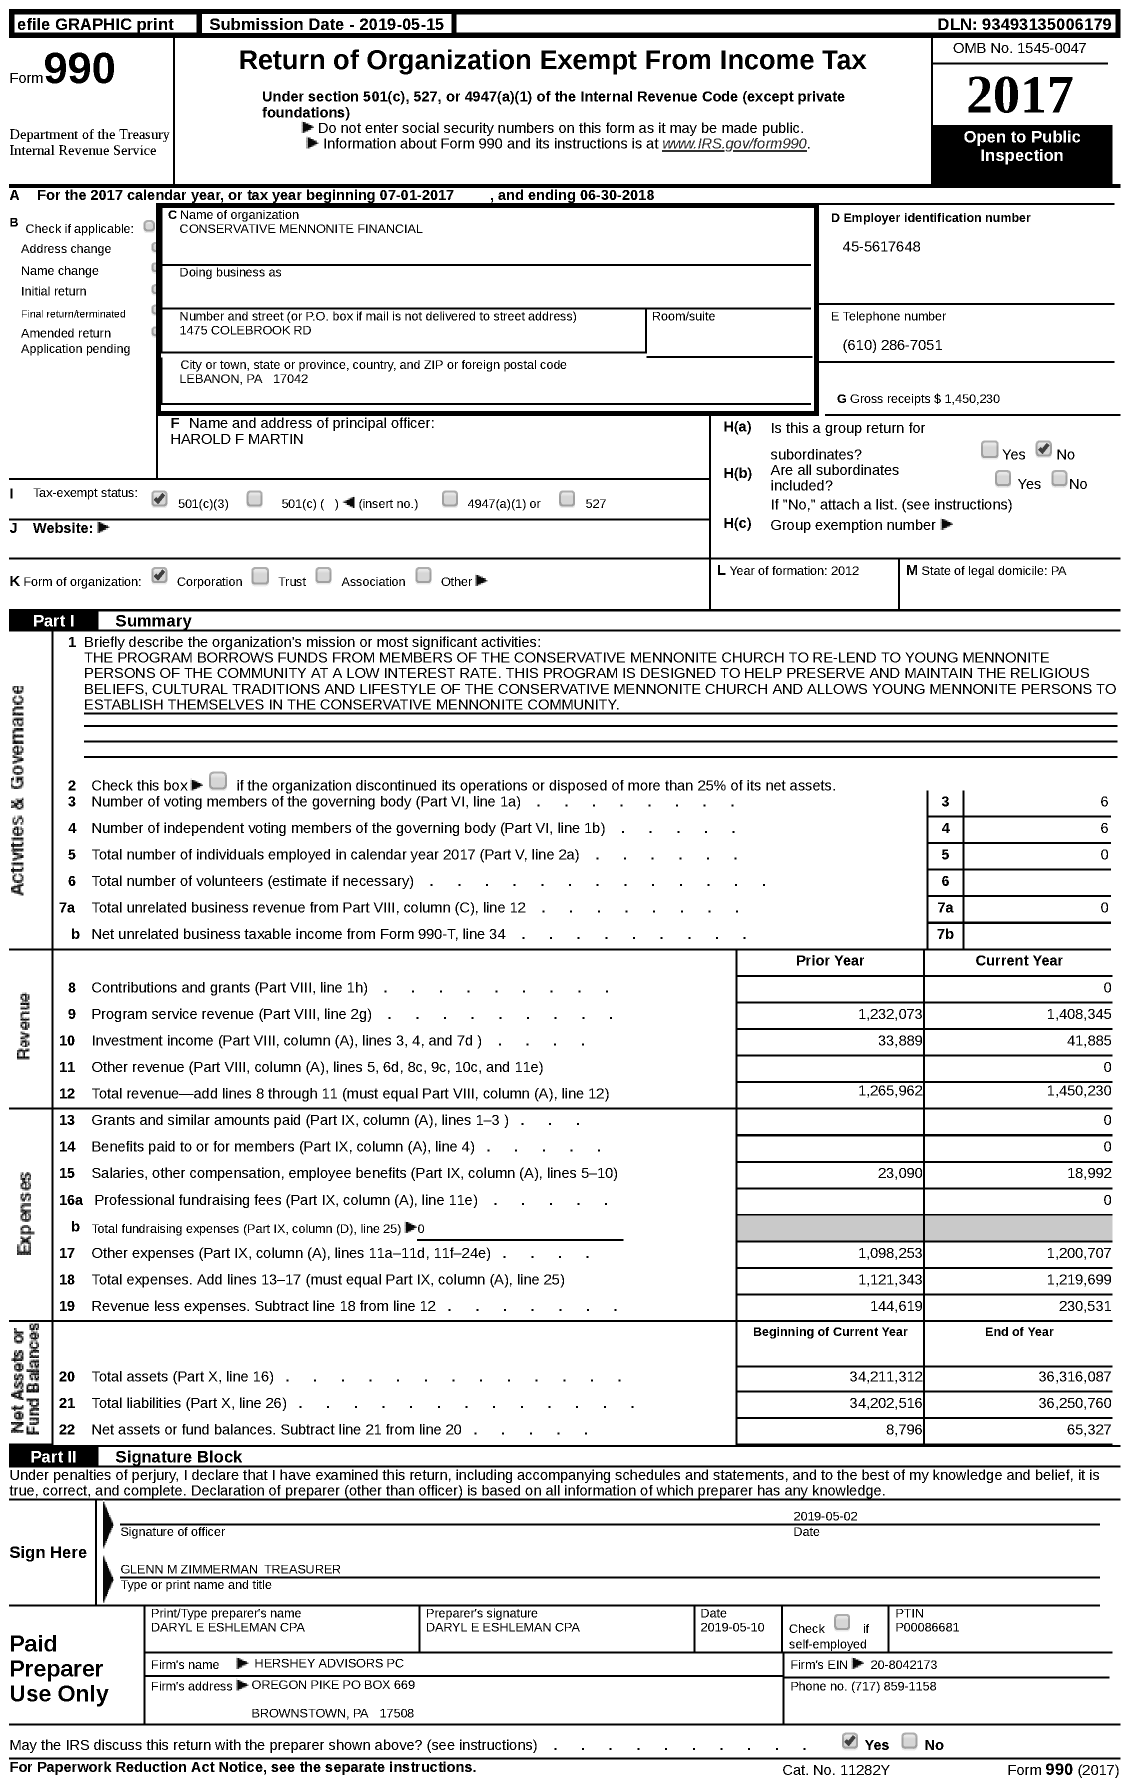 Image of first page of 2017 Form 990 for Conservative Mennonite Financial